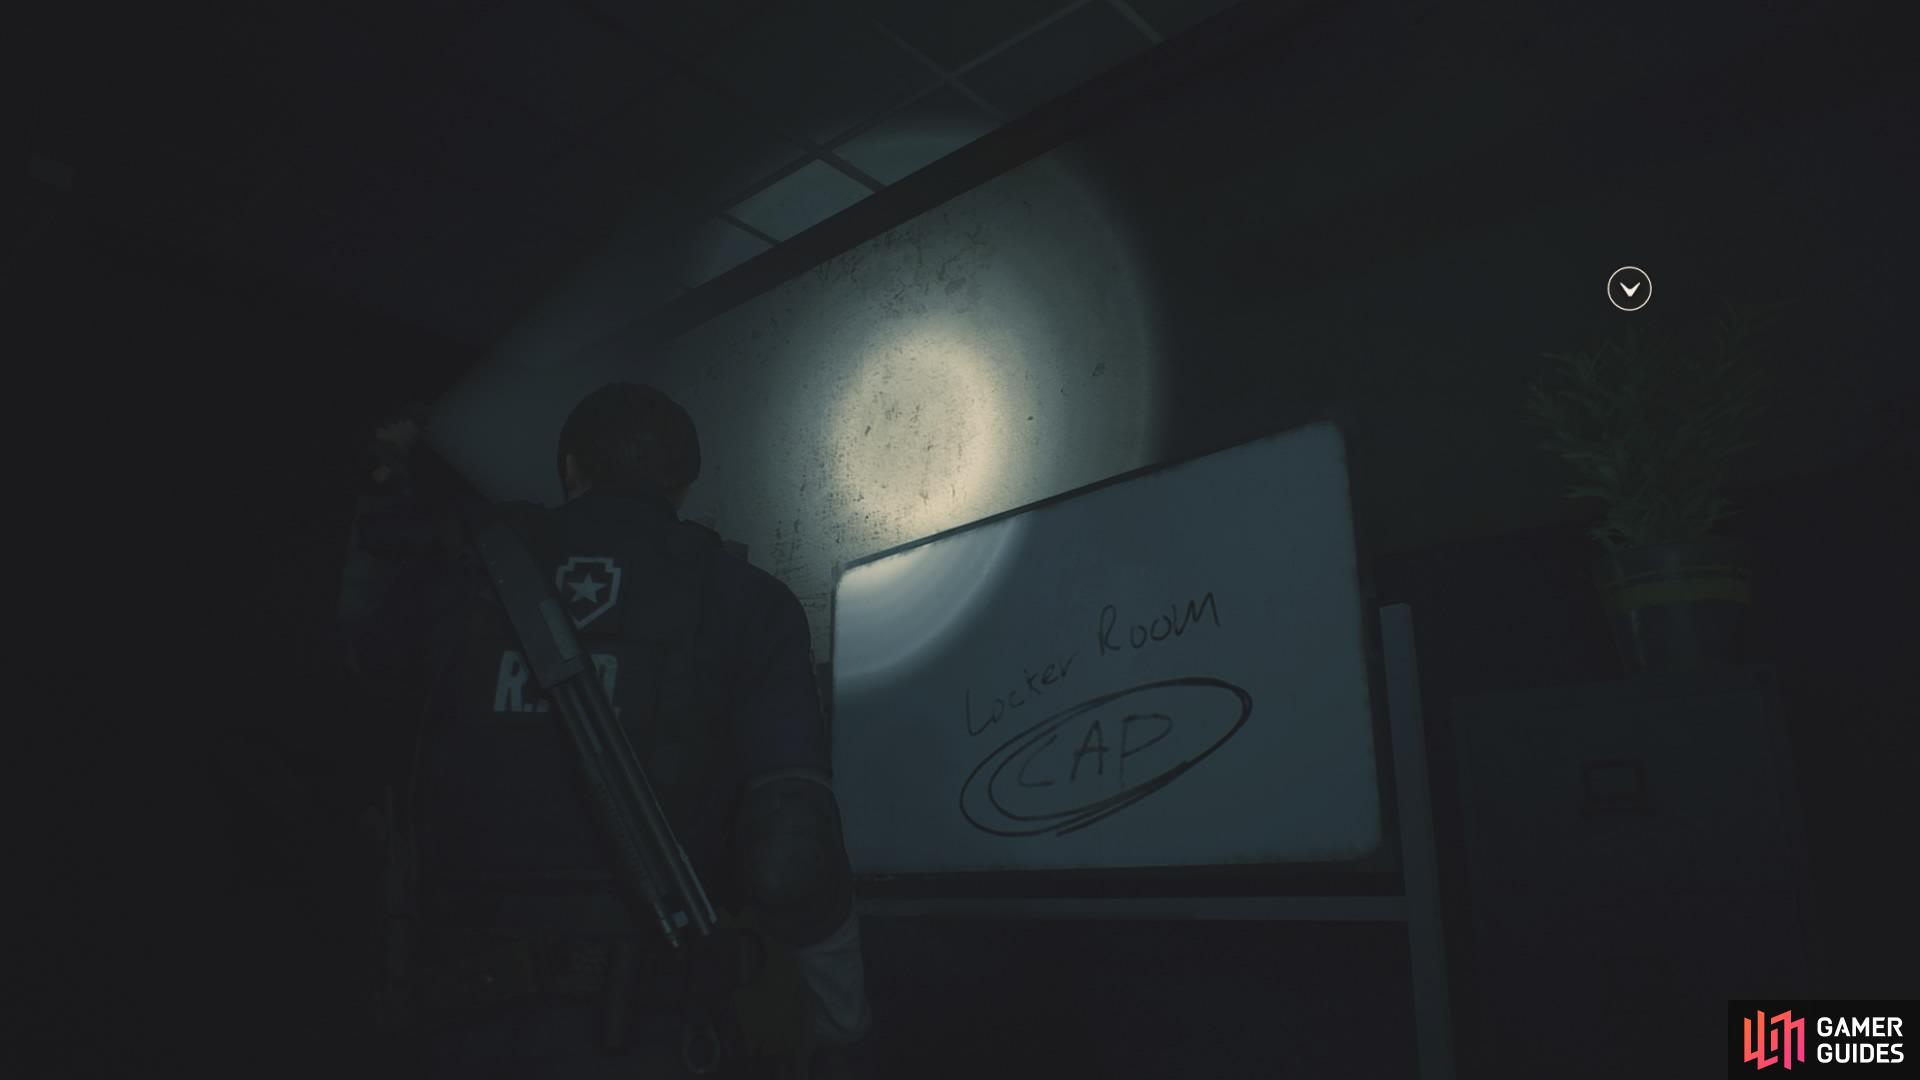 You'll be able to find the combination for the locker once you've unlocked the chained door in the Operations Room